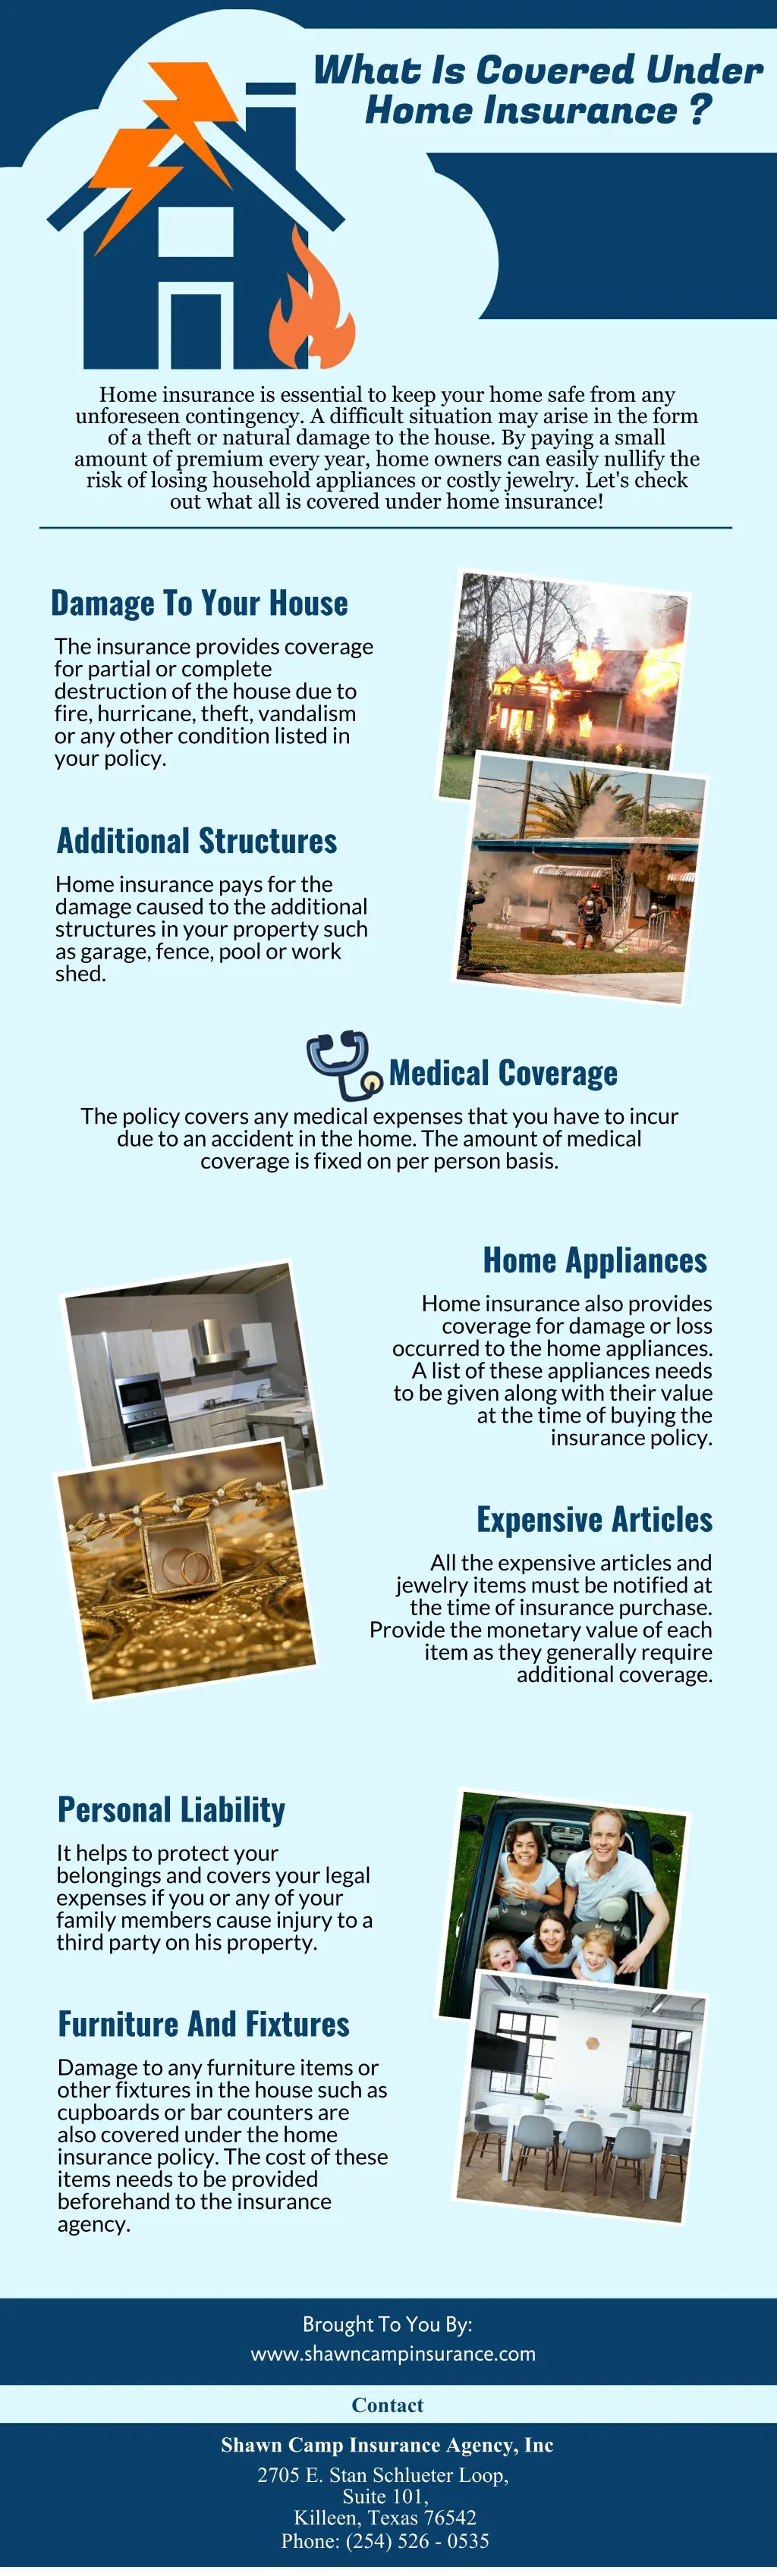 what is covered under home insurance